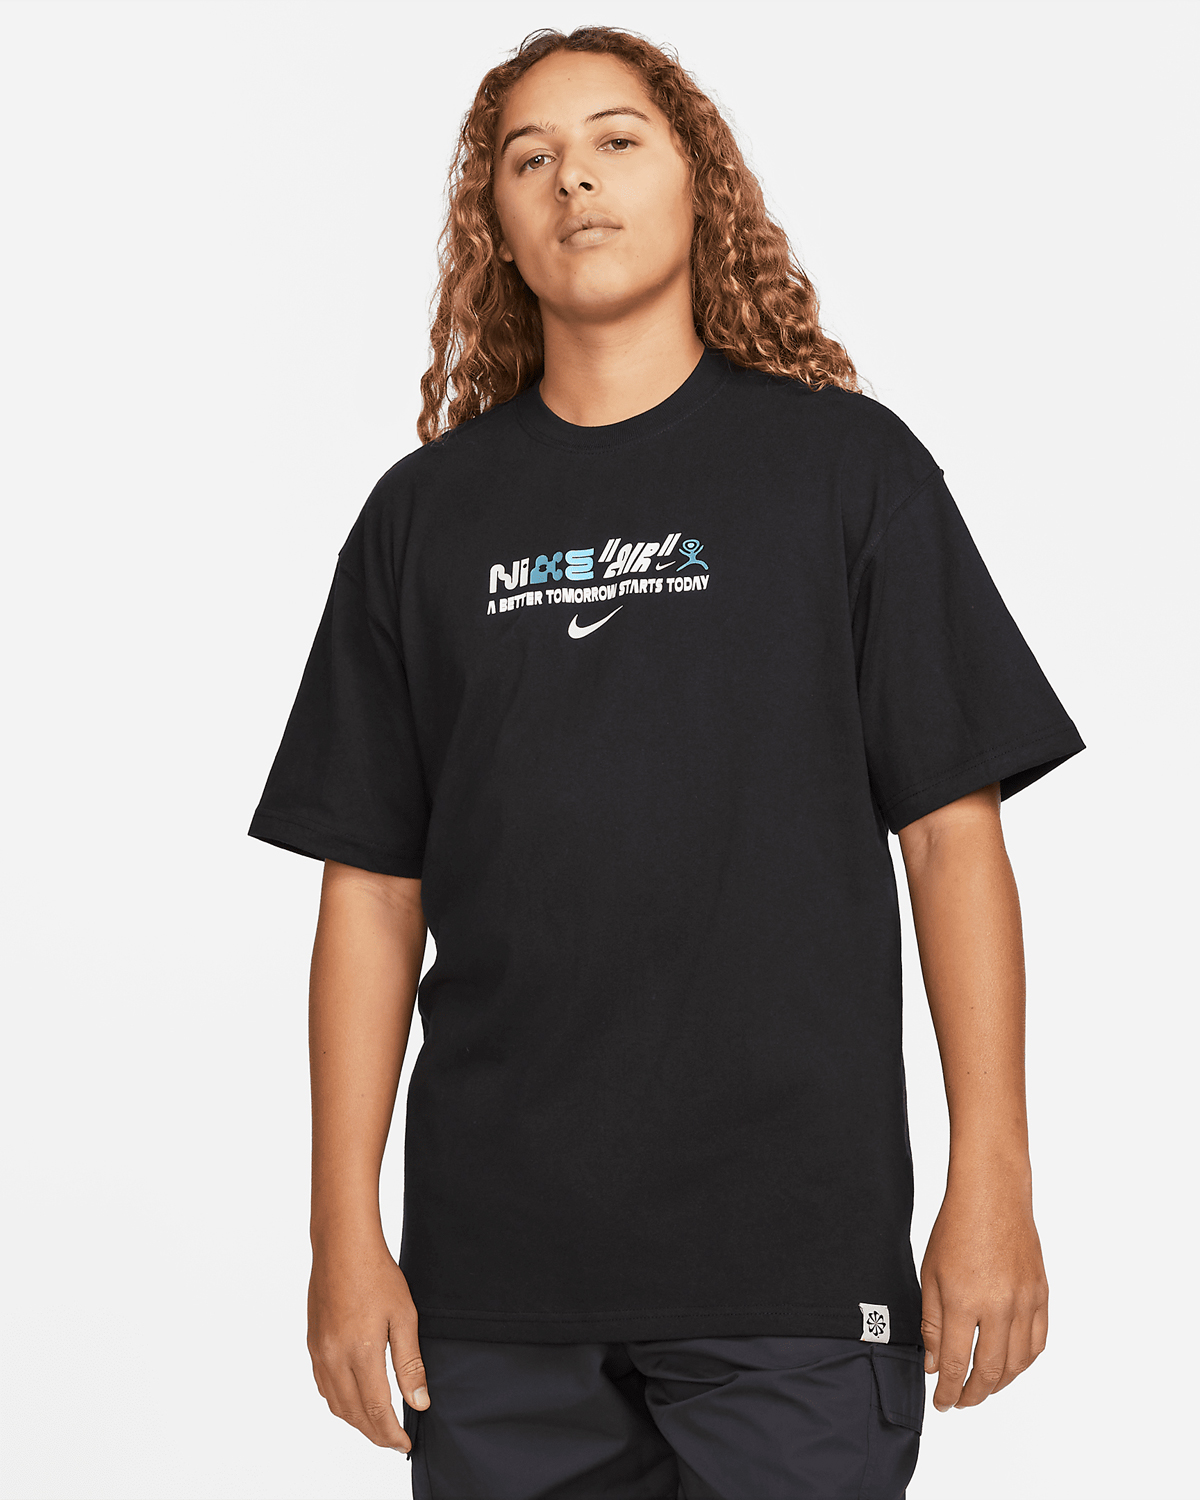 Nike-Air-Force-1-Low-Tiffany-and-Co-T-Shirt-Match-1